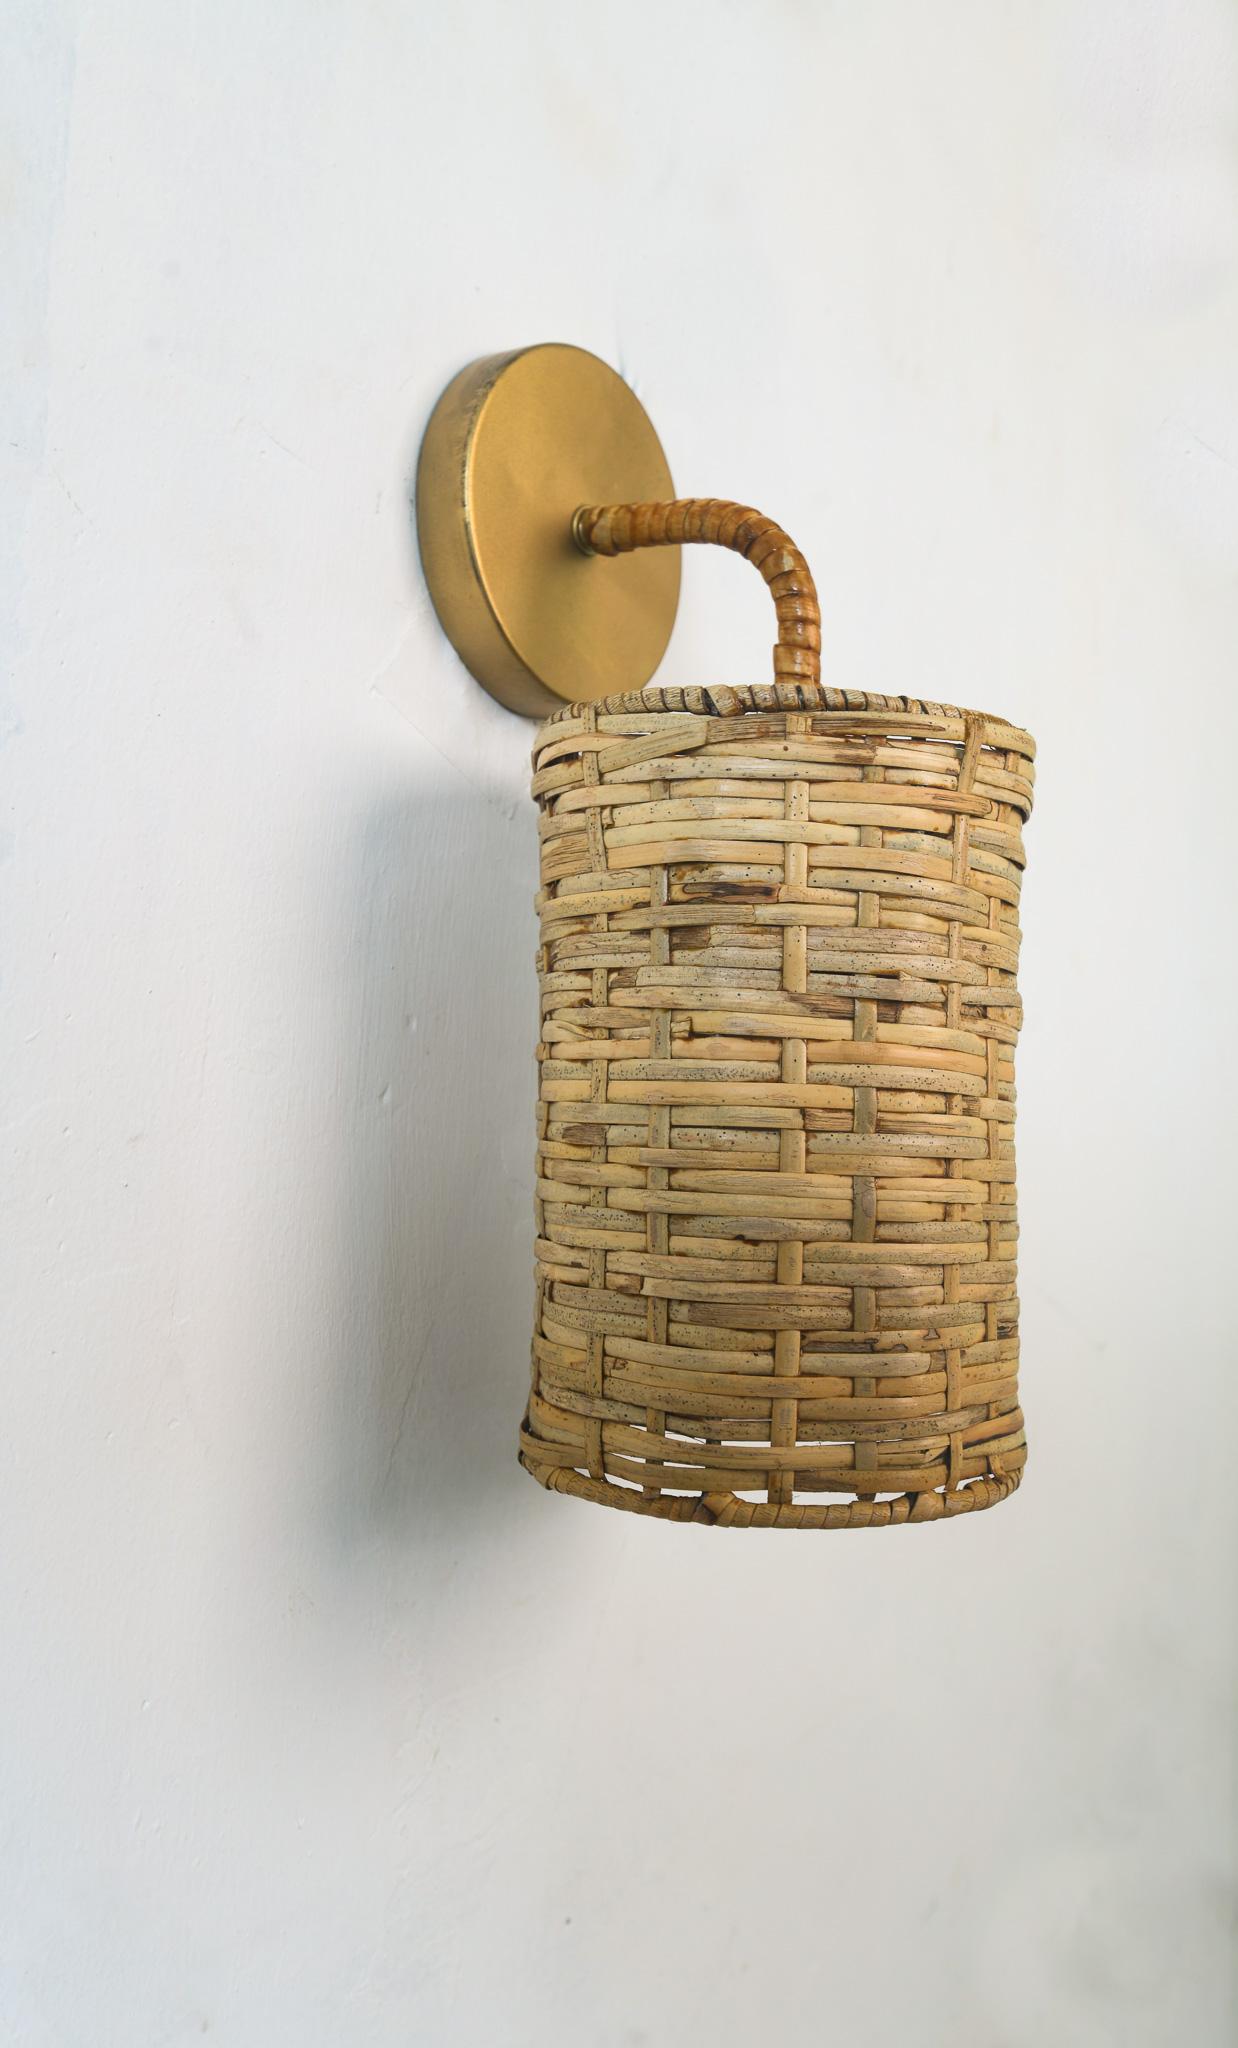 Mid- century modern wall mounted lamp with a rattan shade sculptured piece perfectly suited for the bedroom shade with a subtle light diffuser shade organic rattan golden metal lamp frame with e27. Dimensions 12W-15D-28L. cm